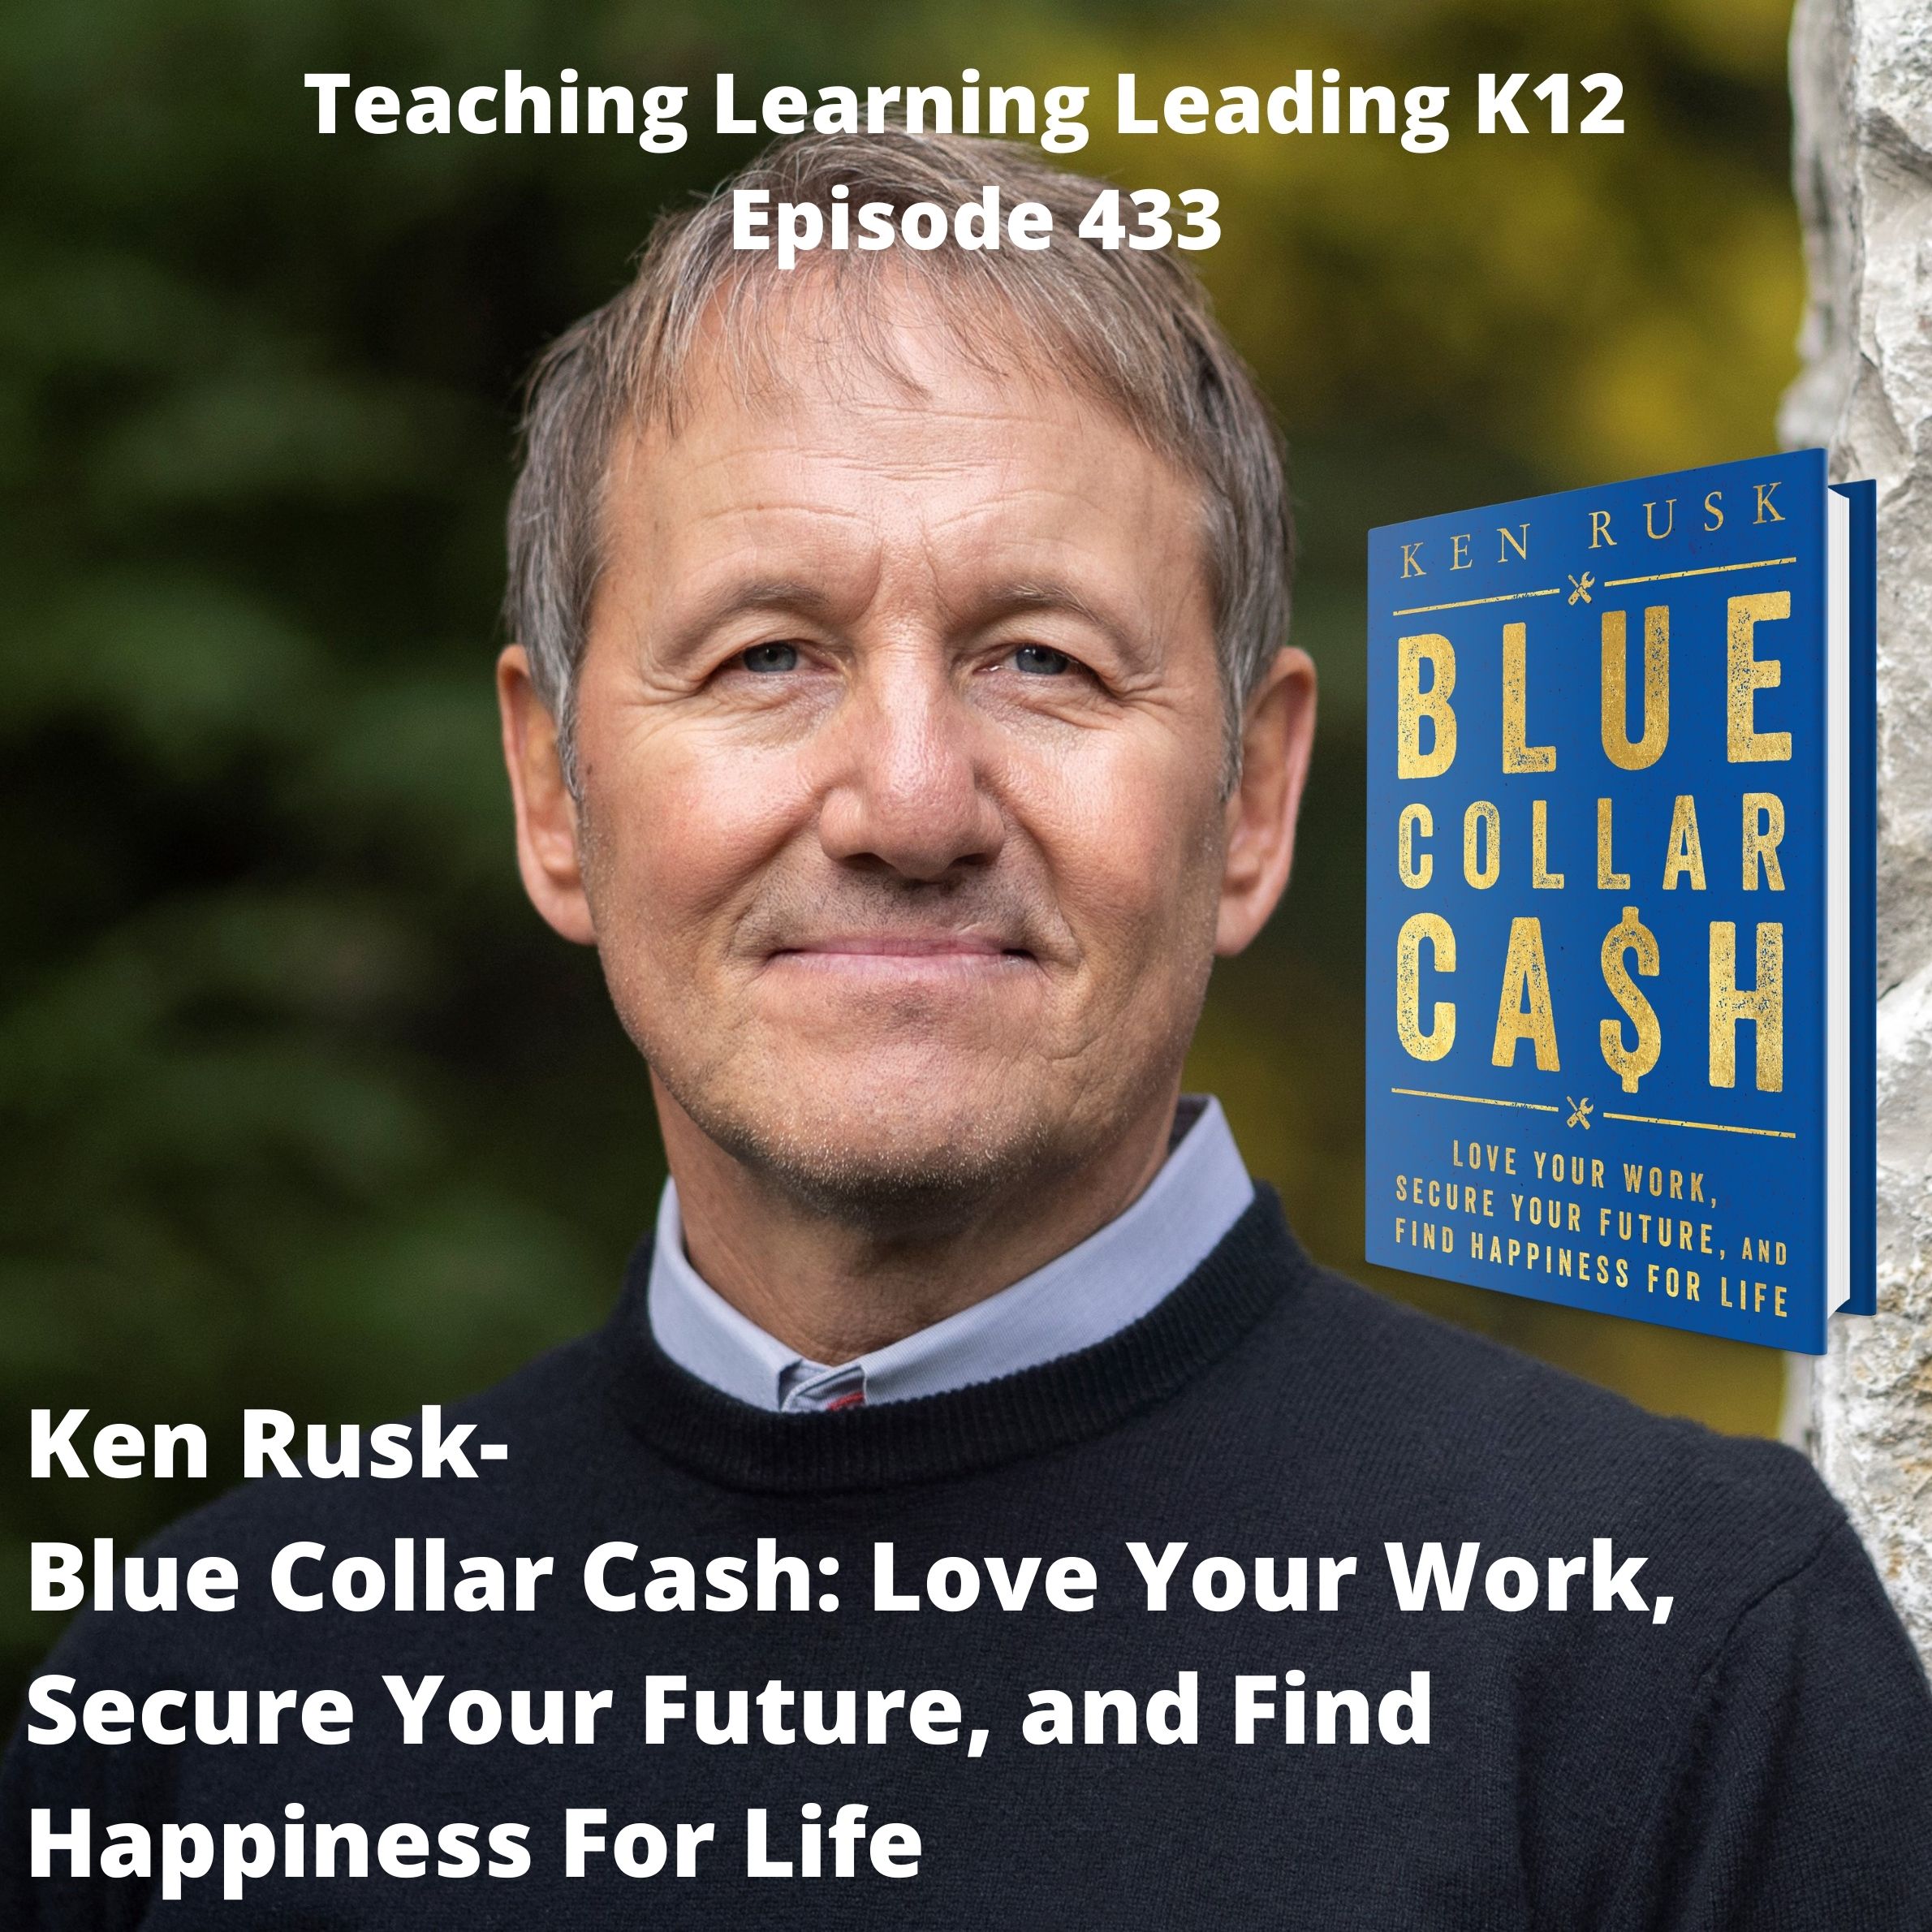 Ken Rusk - Blue Collar Cash: Love Your Work, Secure Your Future, and Find Happiness For Life - 433 Image